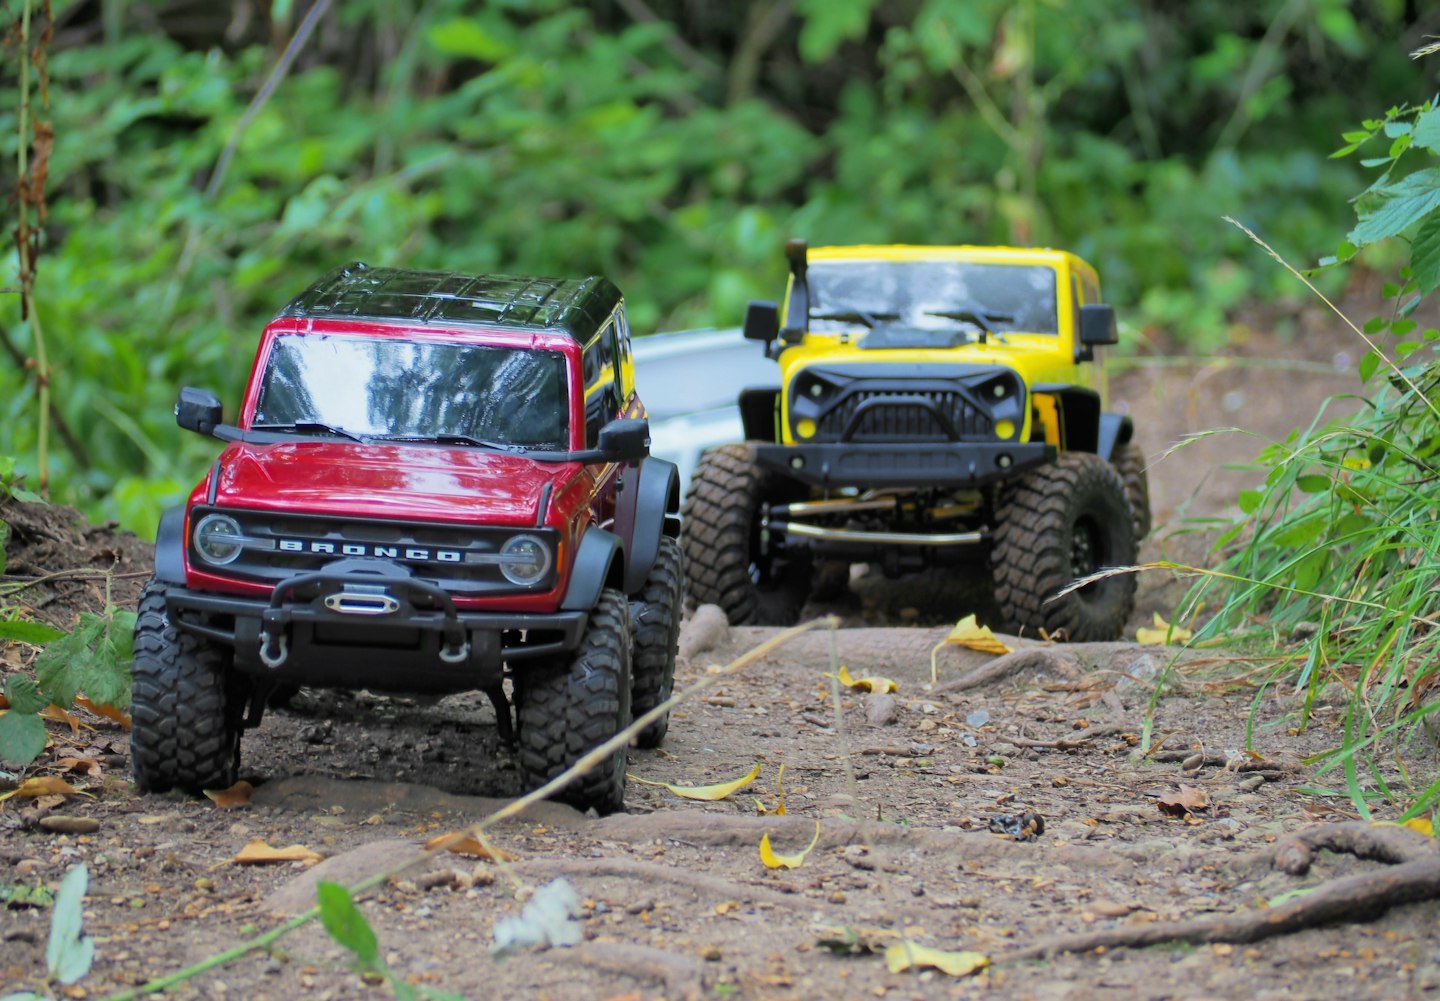 Traxxas Bronco leading a convoy of vehicles